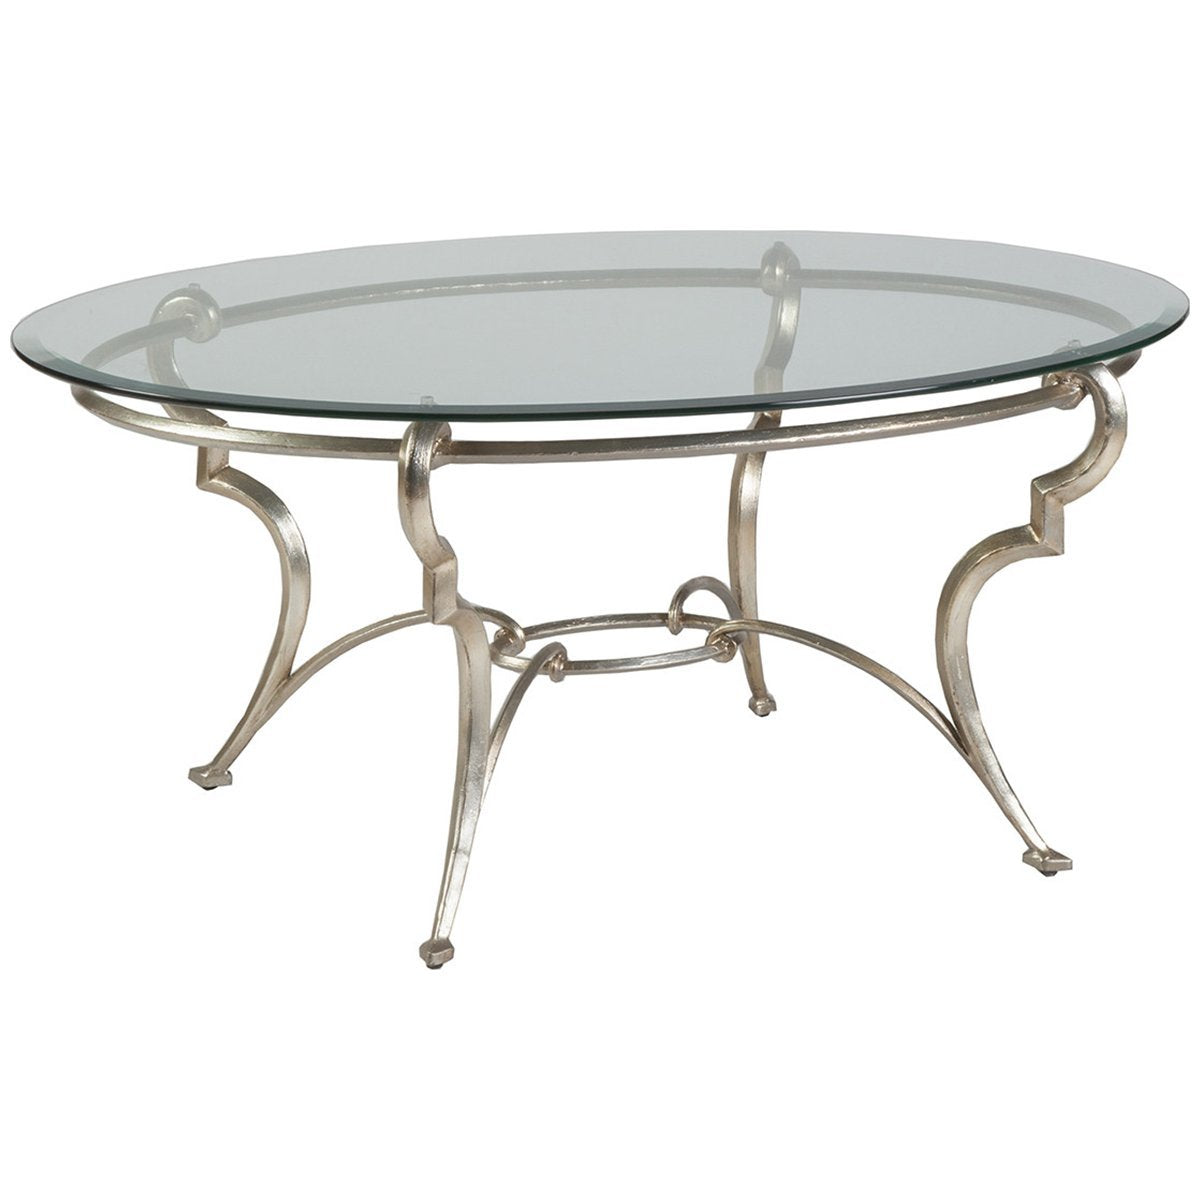 Artistica Home Colette Oval Cocktail Table 01-2022-949C